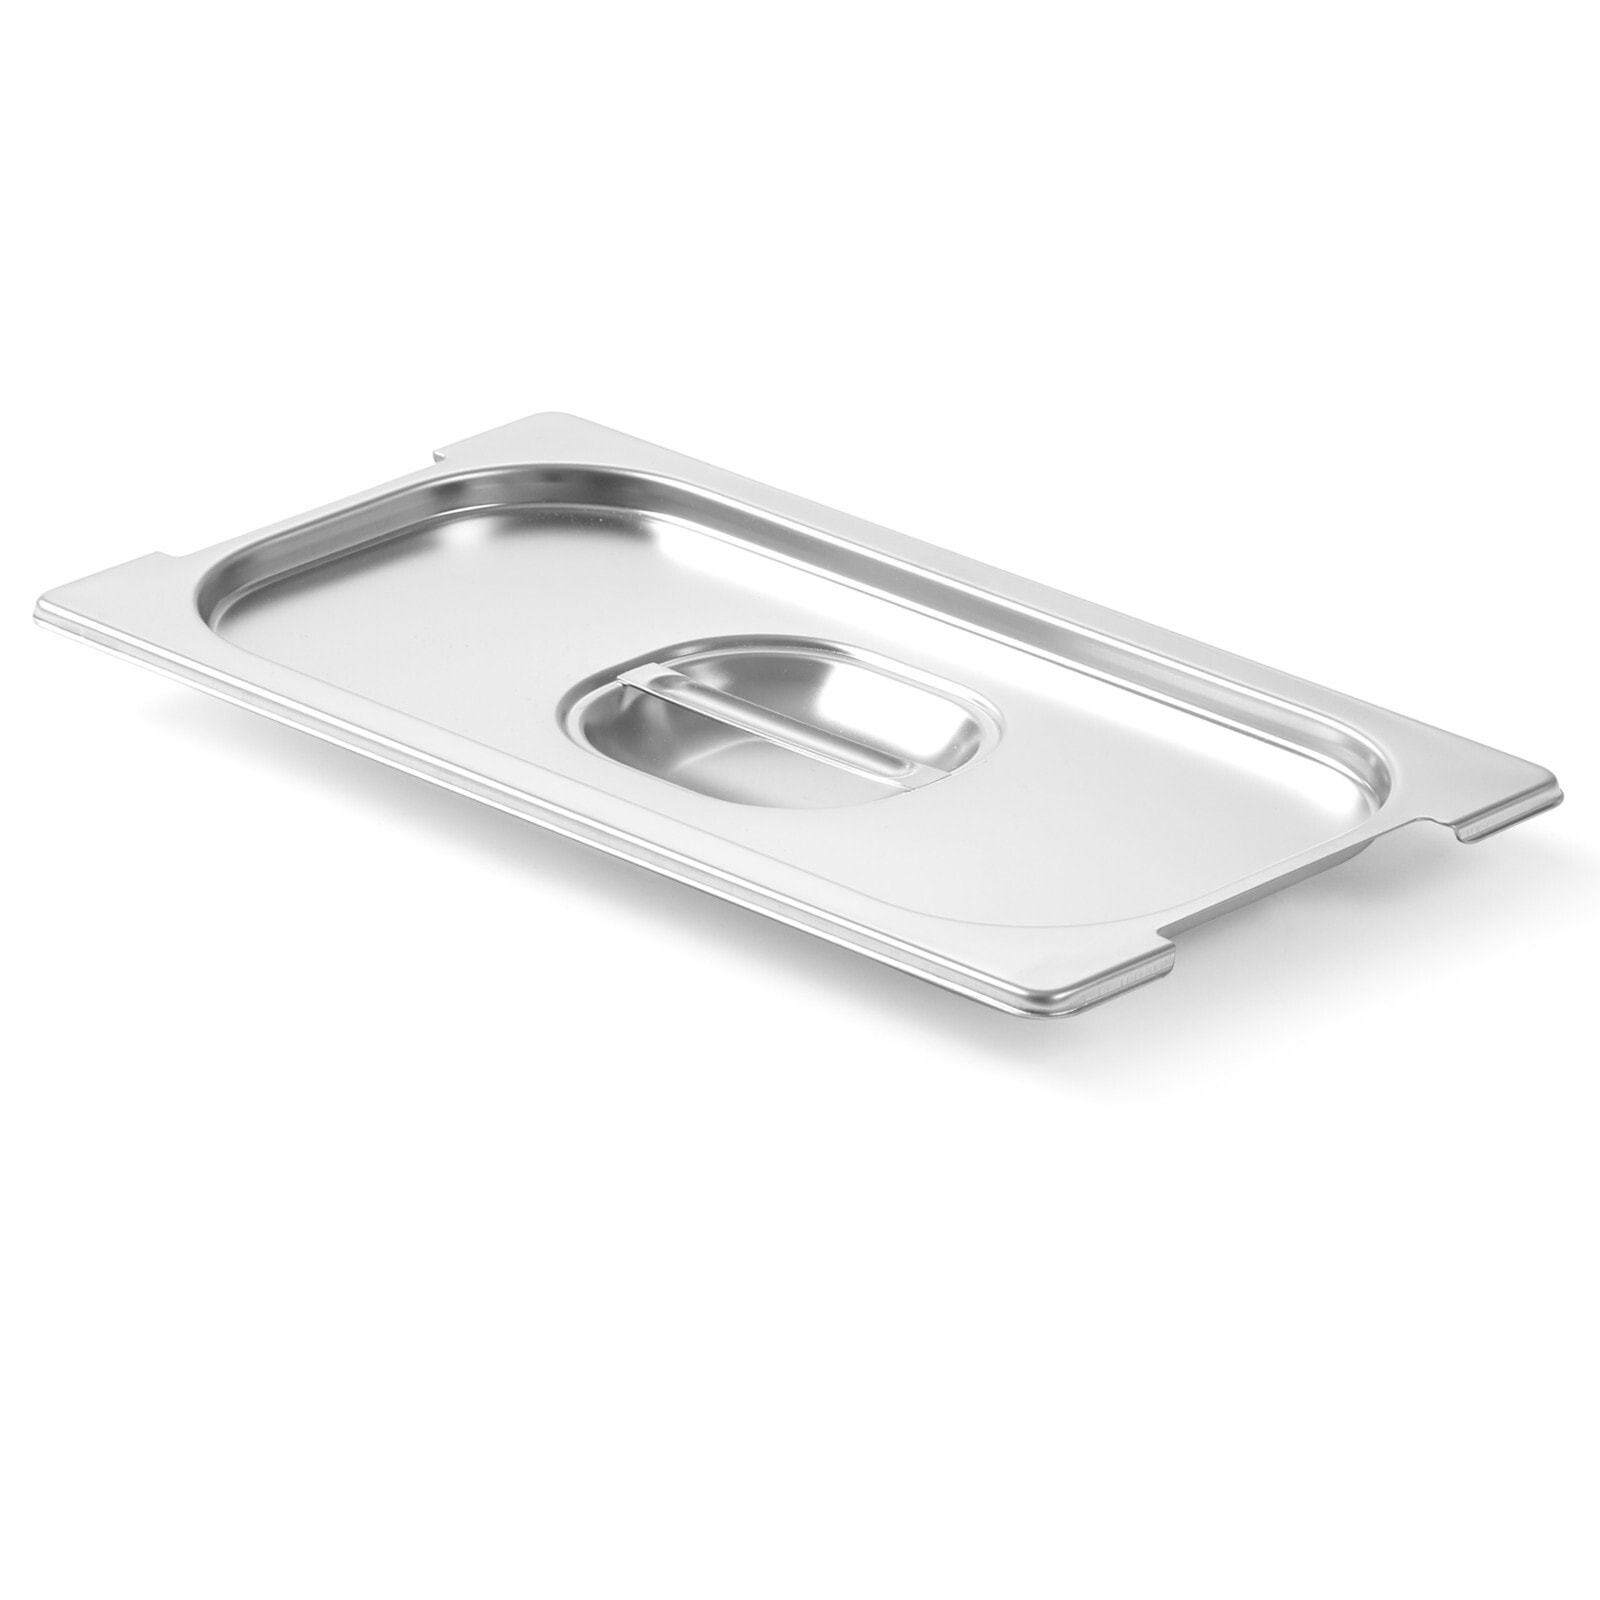 The lid for the GN container Profi Line with a cutout for the handles GN1 / 3 325x176mm, stainless steel - Hendi 804230